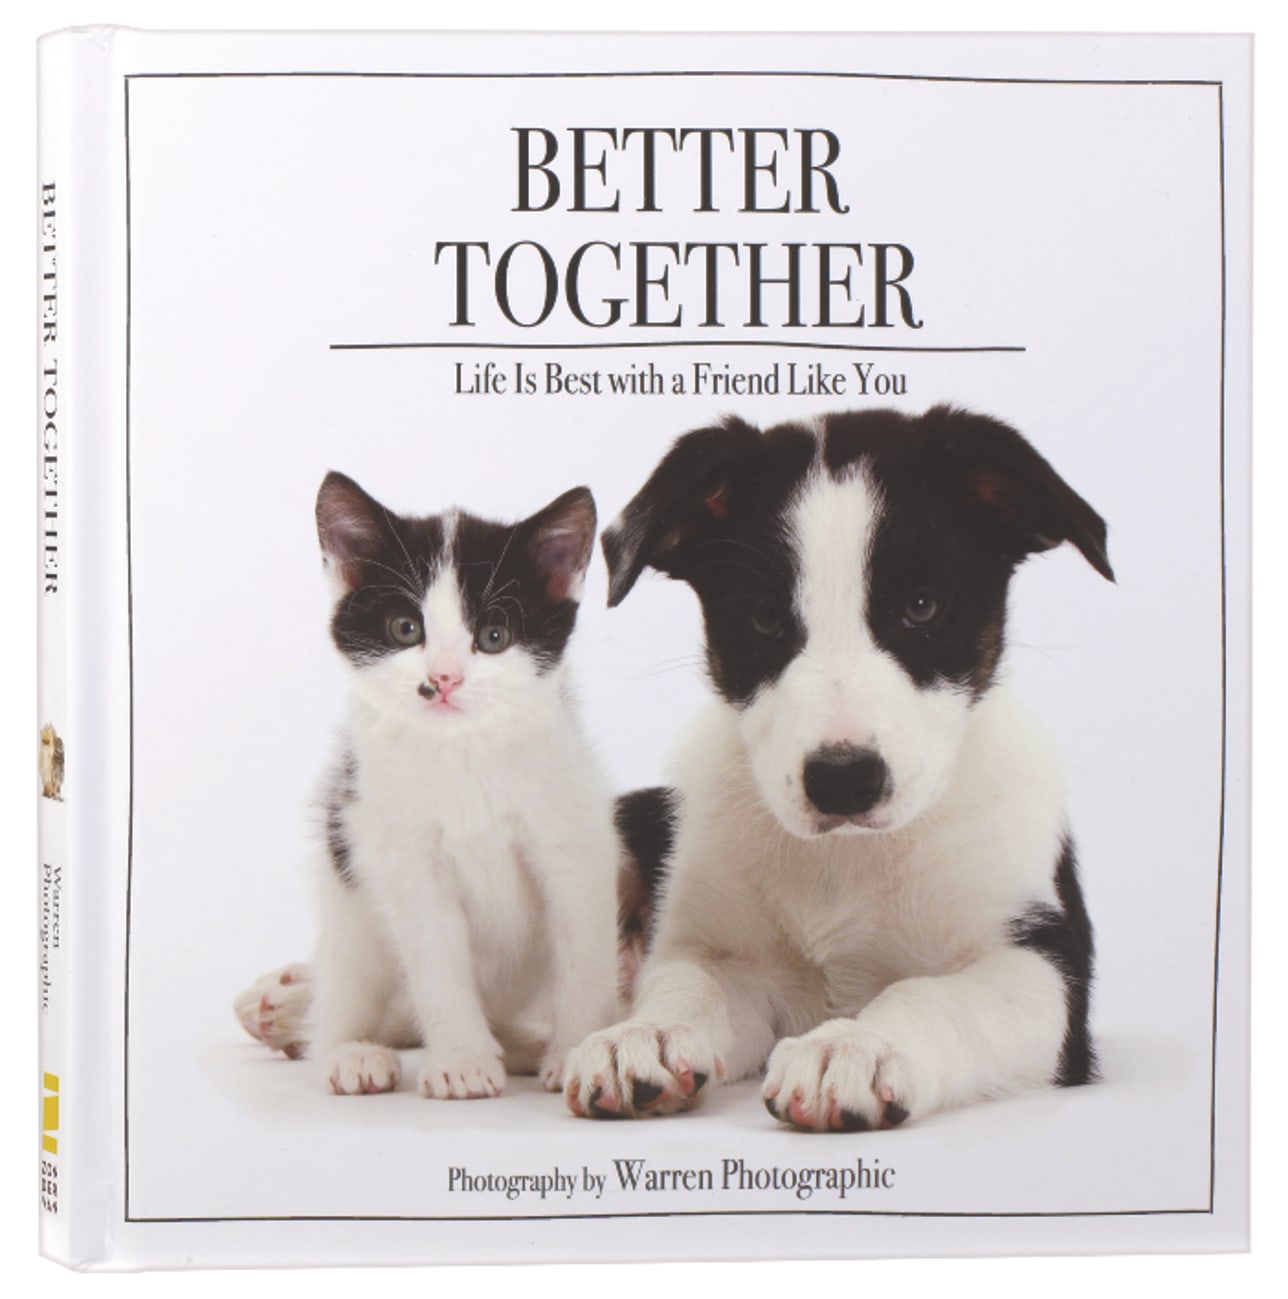 Better Together: Life is Best With a Friend Like You Hardback